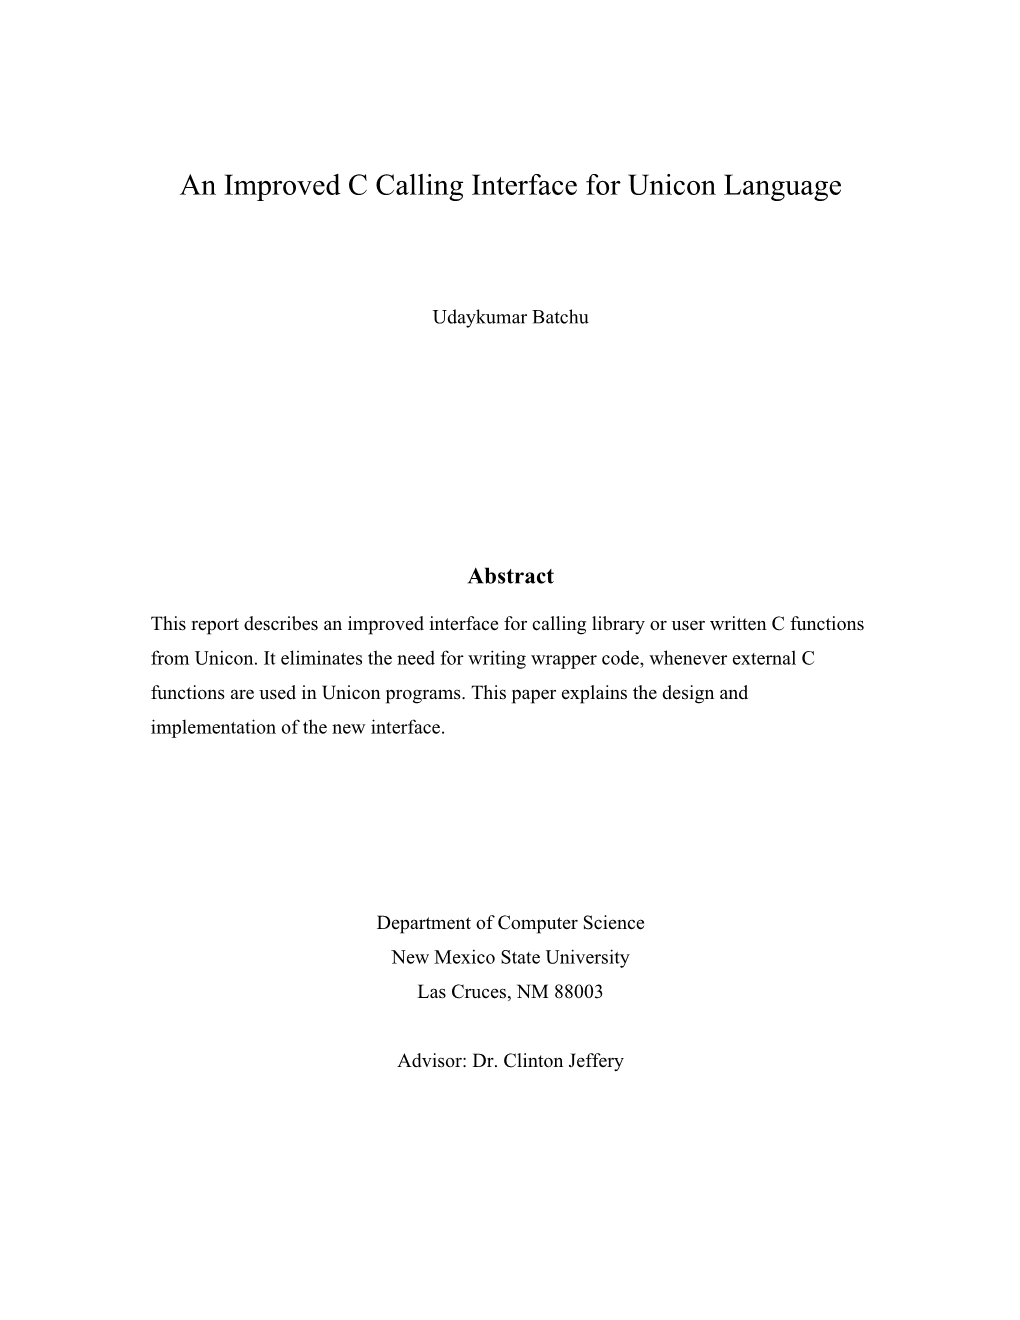 An Improved C Calling Interface for Unicon Language